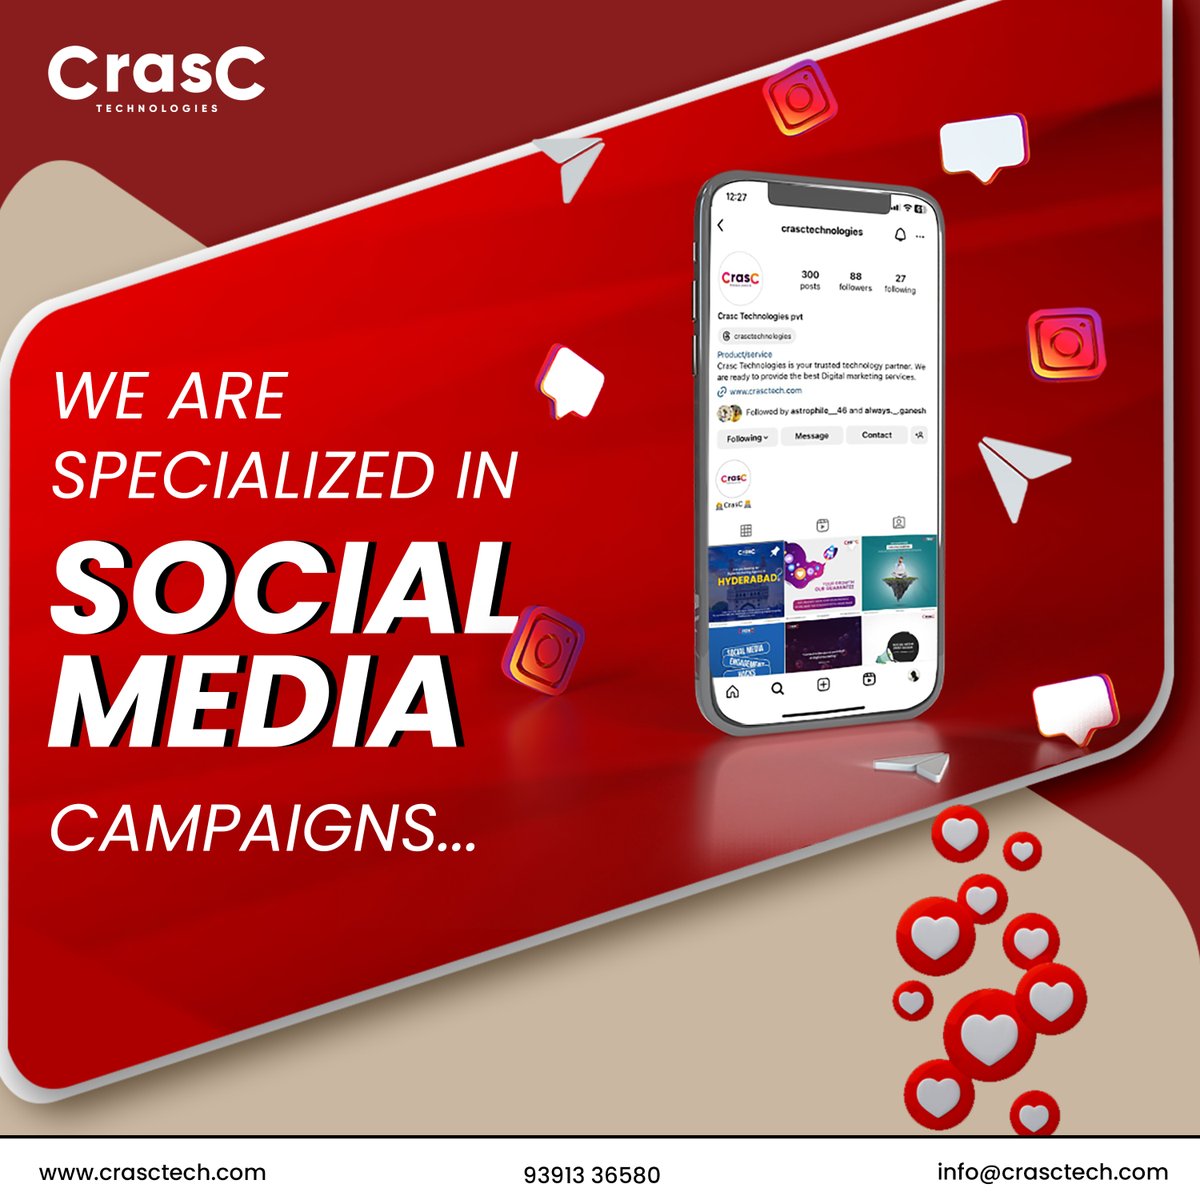 💼 At Crasctech, we understand the power of good design in driving social media engagement! 📱 💻 Let our specialized campaigns and visually appealing content take your brand to new heights.📈 #crasctech #digitalmarketing #socialmediamarketing #campaigns #Twitter #Trending